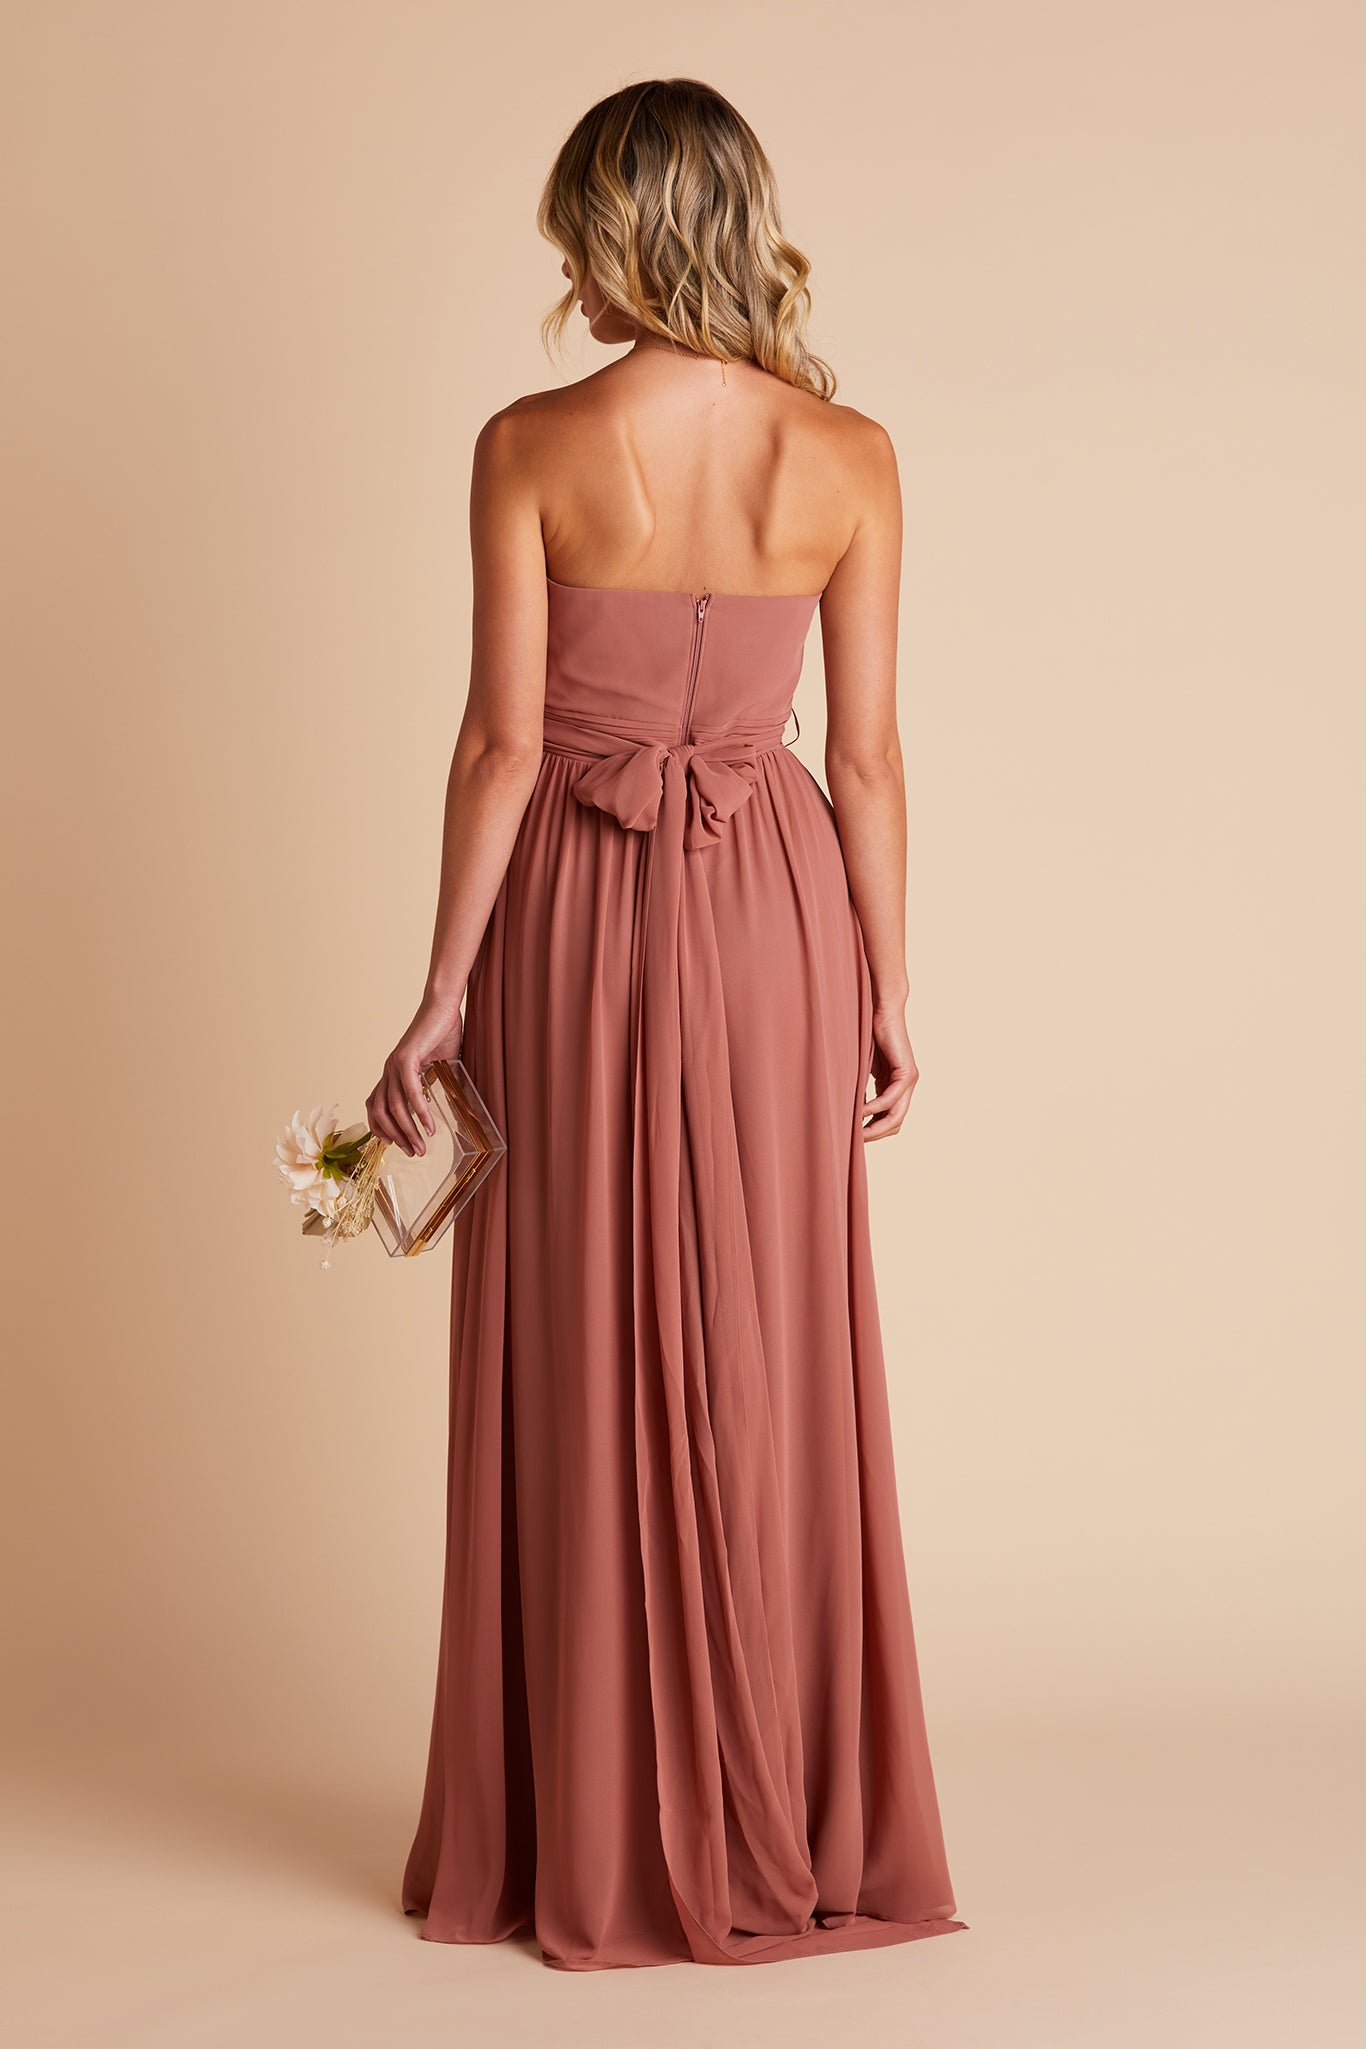 Grace convertible bridesmaid dress with slit in desert rose by Birdy Grey, back view